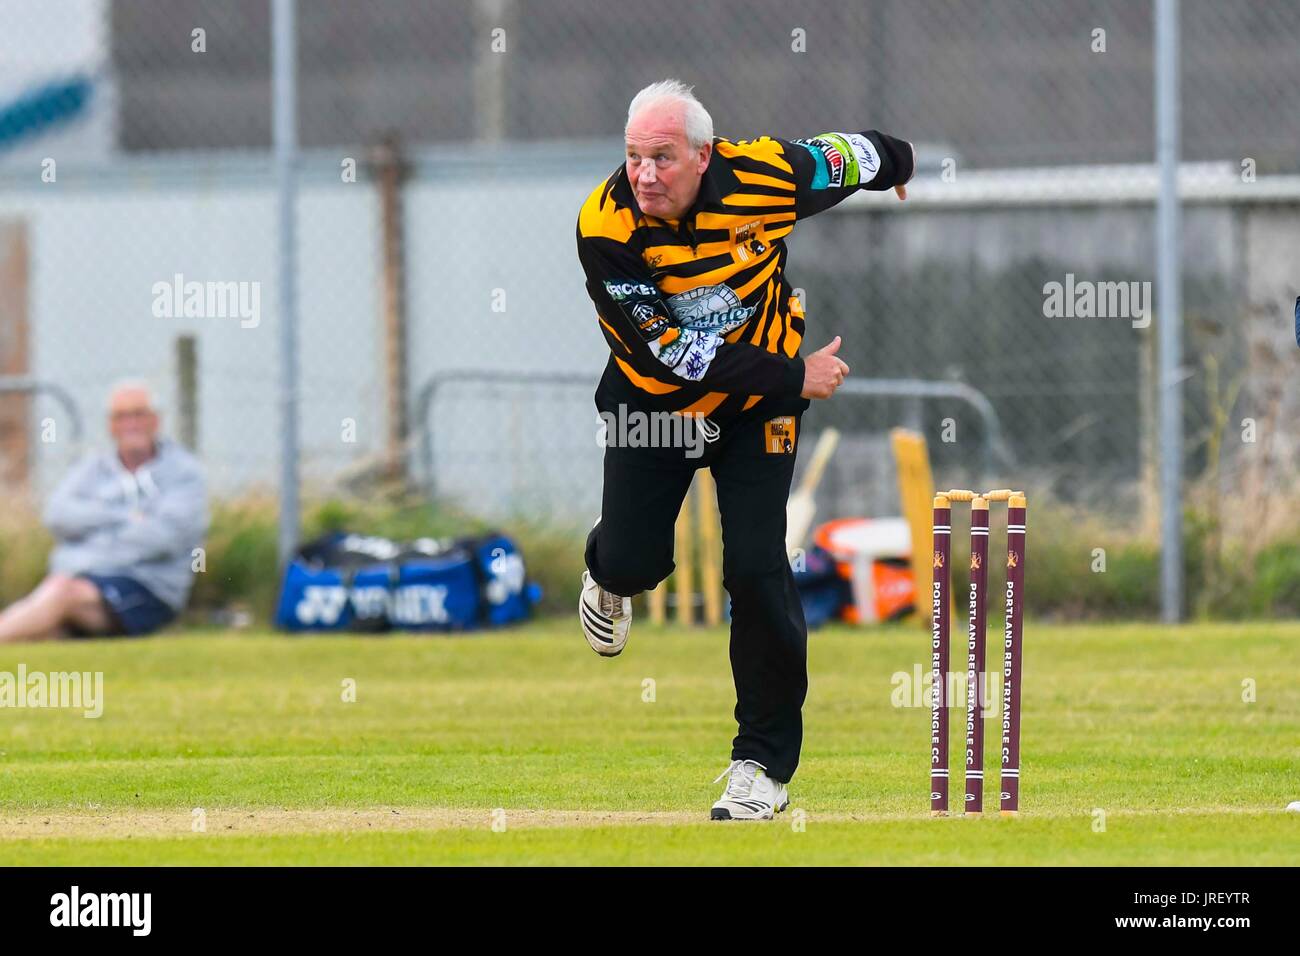 Easton, Portland, Dorset, UK.  4th August 2017.  Former England spin bowling legend John Embury during the Portland Red Triangle match v Lashings All Stars at the Reforne cricket ground at Easton in Dorset.  Photo Credit: Graham Hunt/Alamy Live News Stock Photo